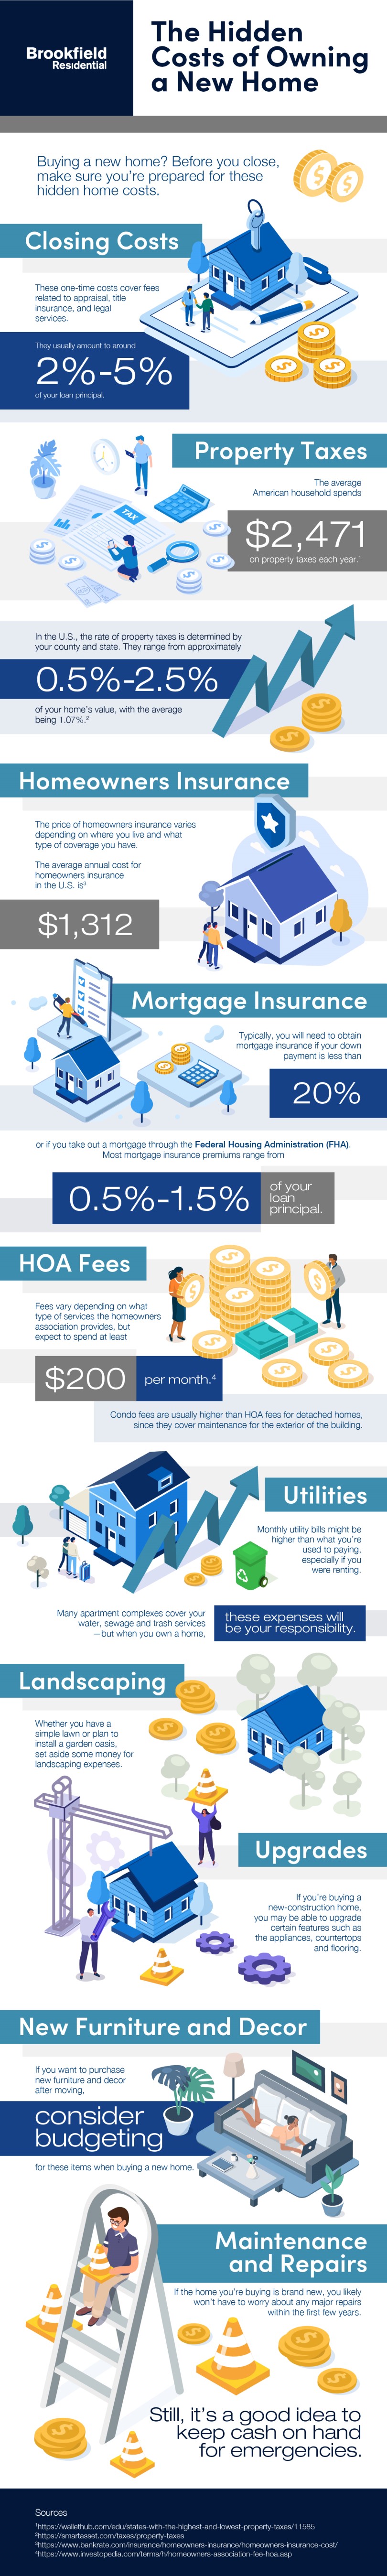 The hidden costs of owning a new home infographic